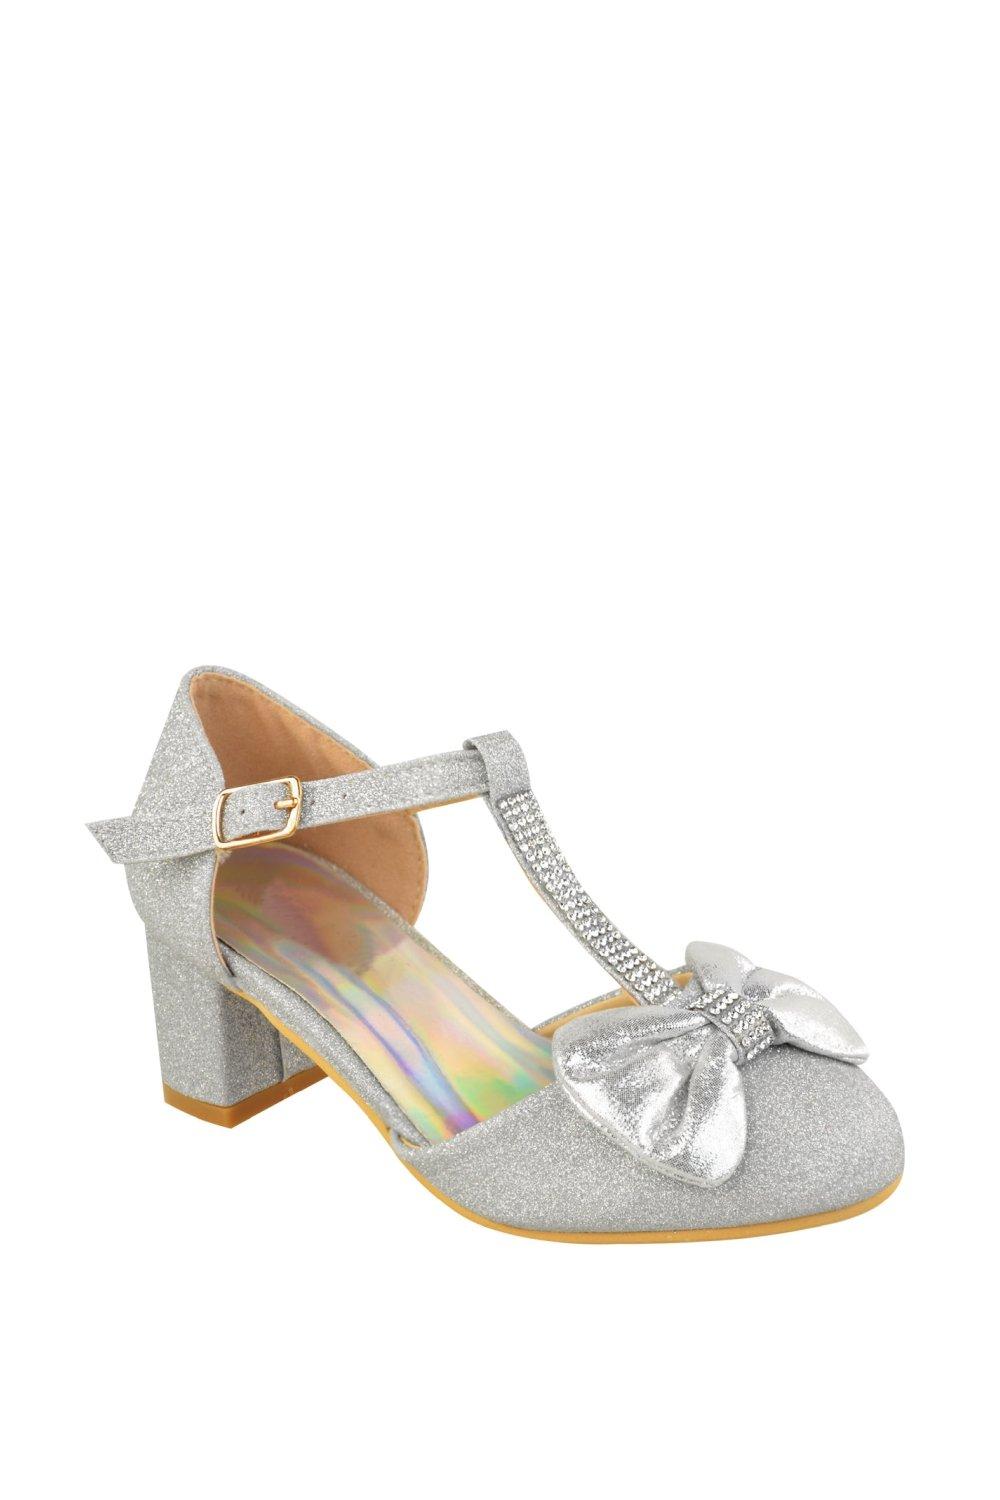 ’Chava’ Mid High Heel Sandals With Bow & Diamante Detail